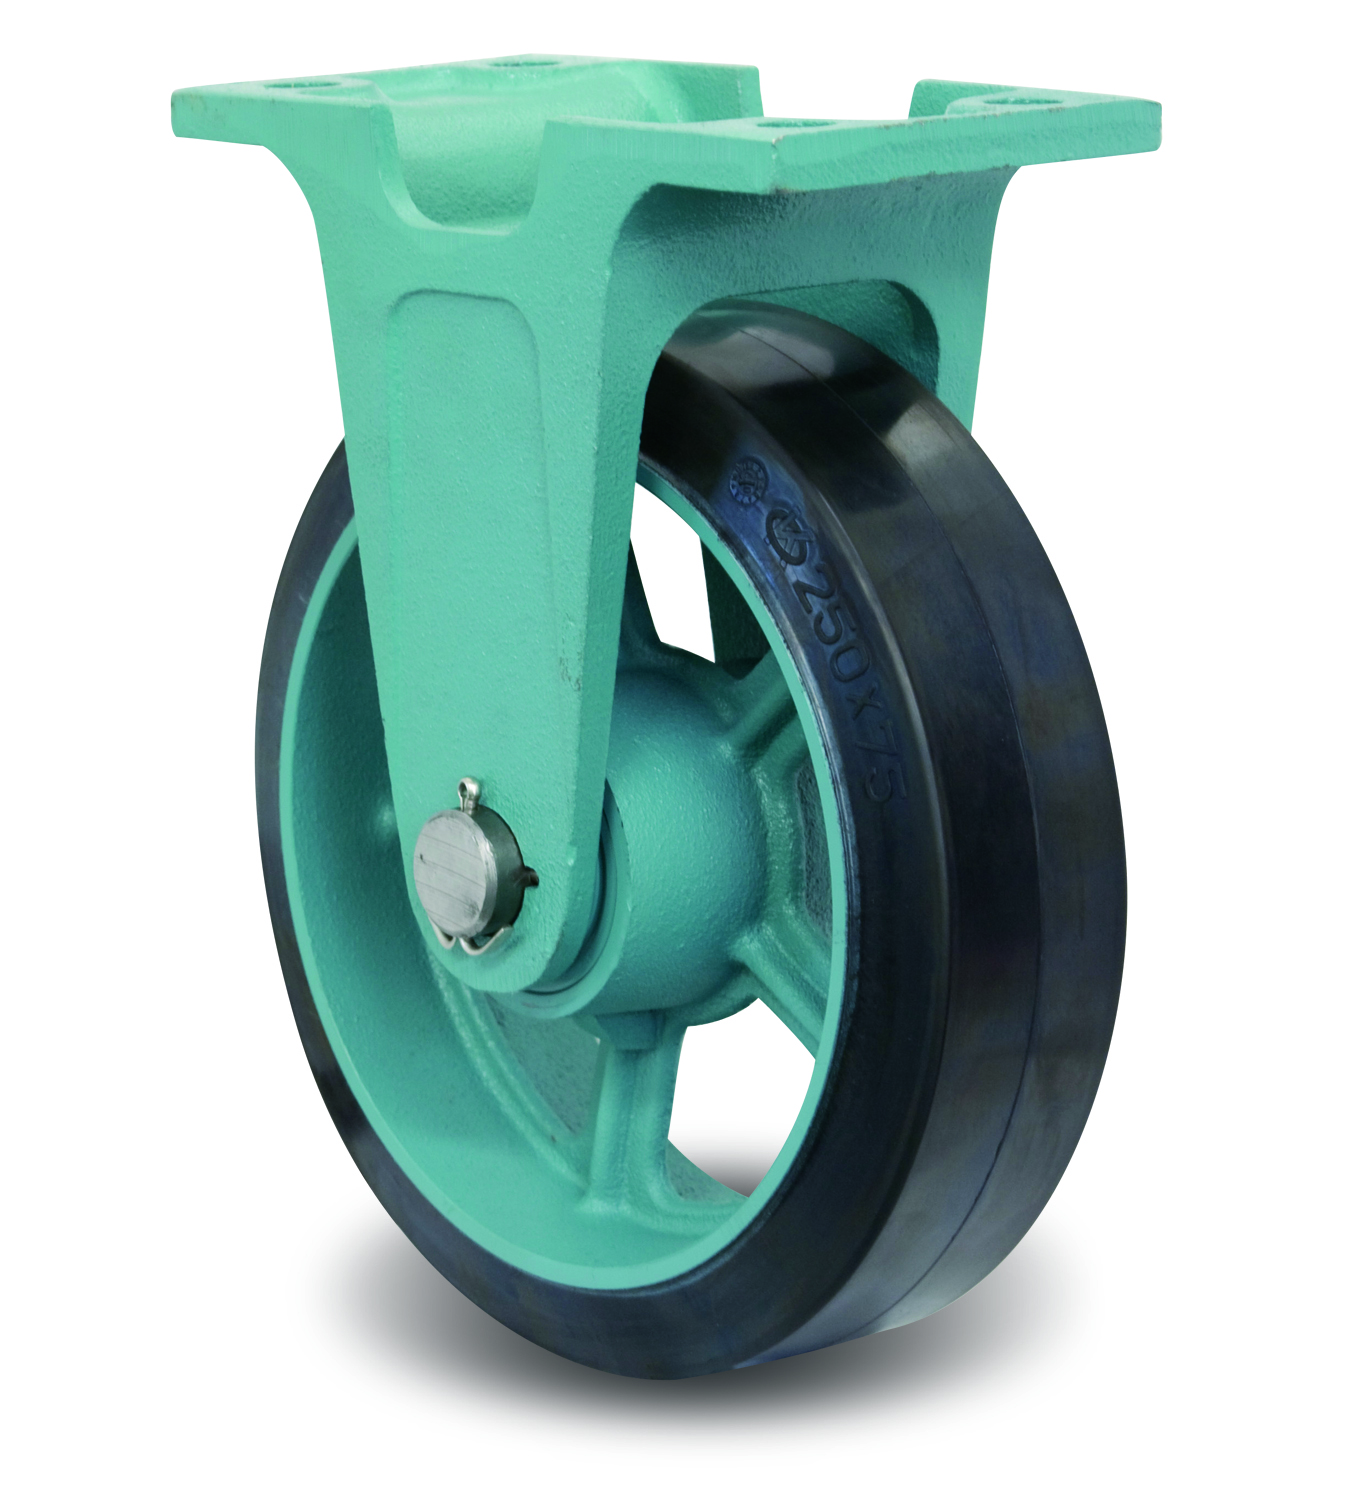 Ductile Caster Wide Type, Fixed MG-W Metal Fittings, E-MG-W (EMG-W250X75) 